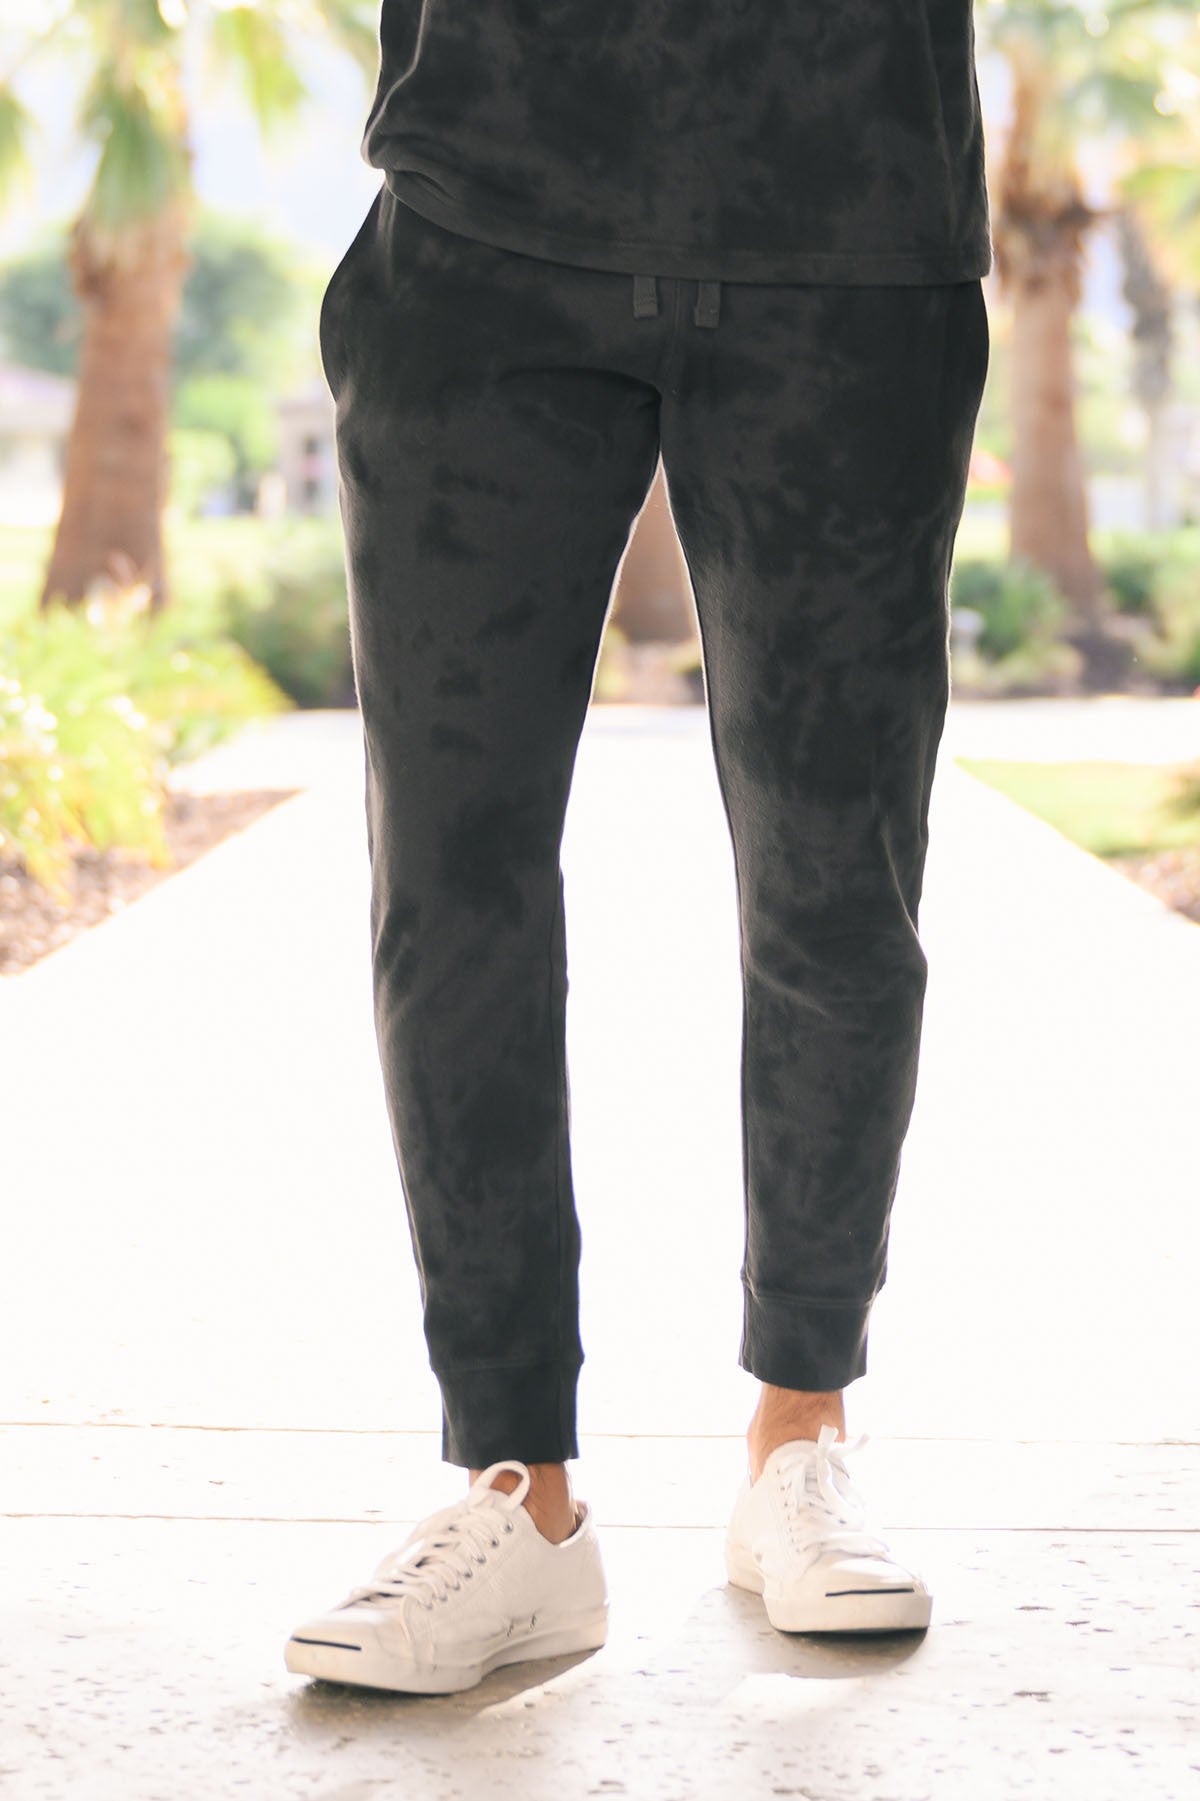 Unisex Dark Grey and Black Tie-Dyed Lounge Street Joggers